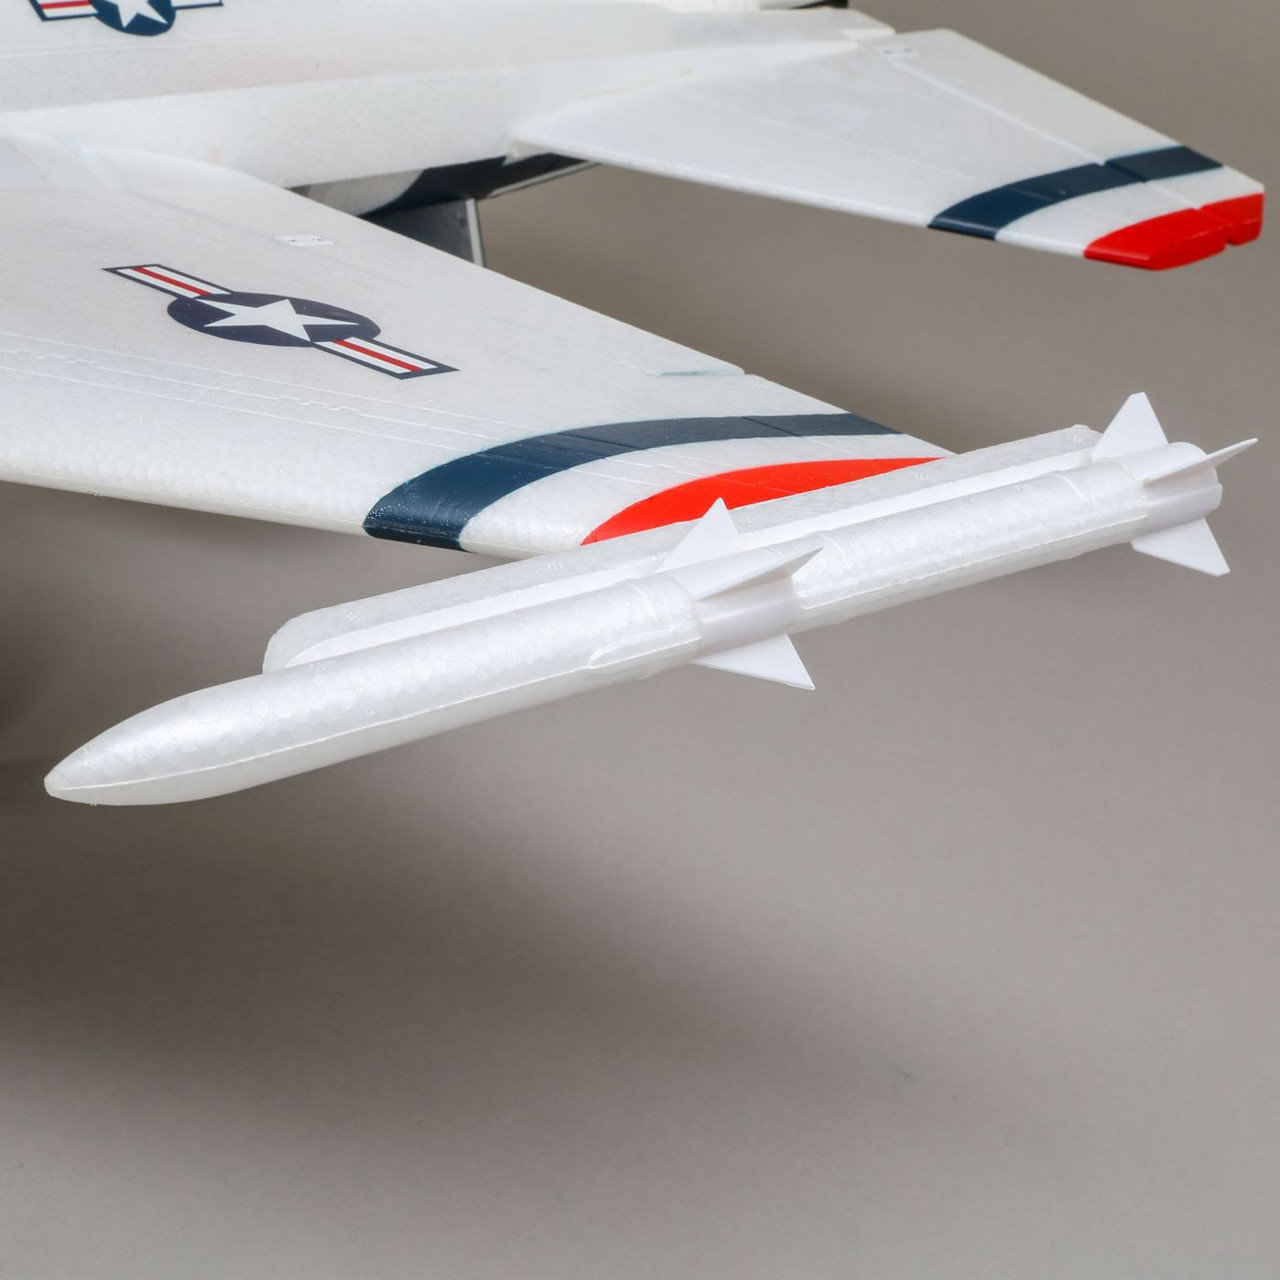 E-flite F-16 Thunderbirds 70mm EDF BNF Basic with AS3X and SAFE Select